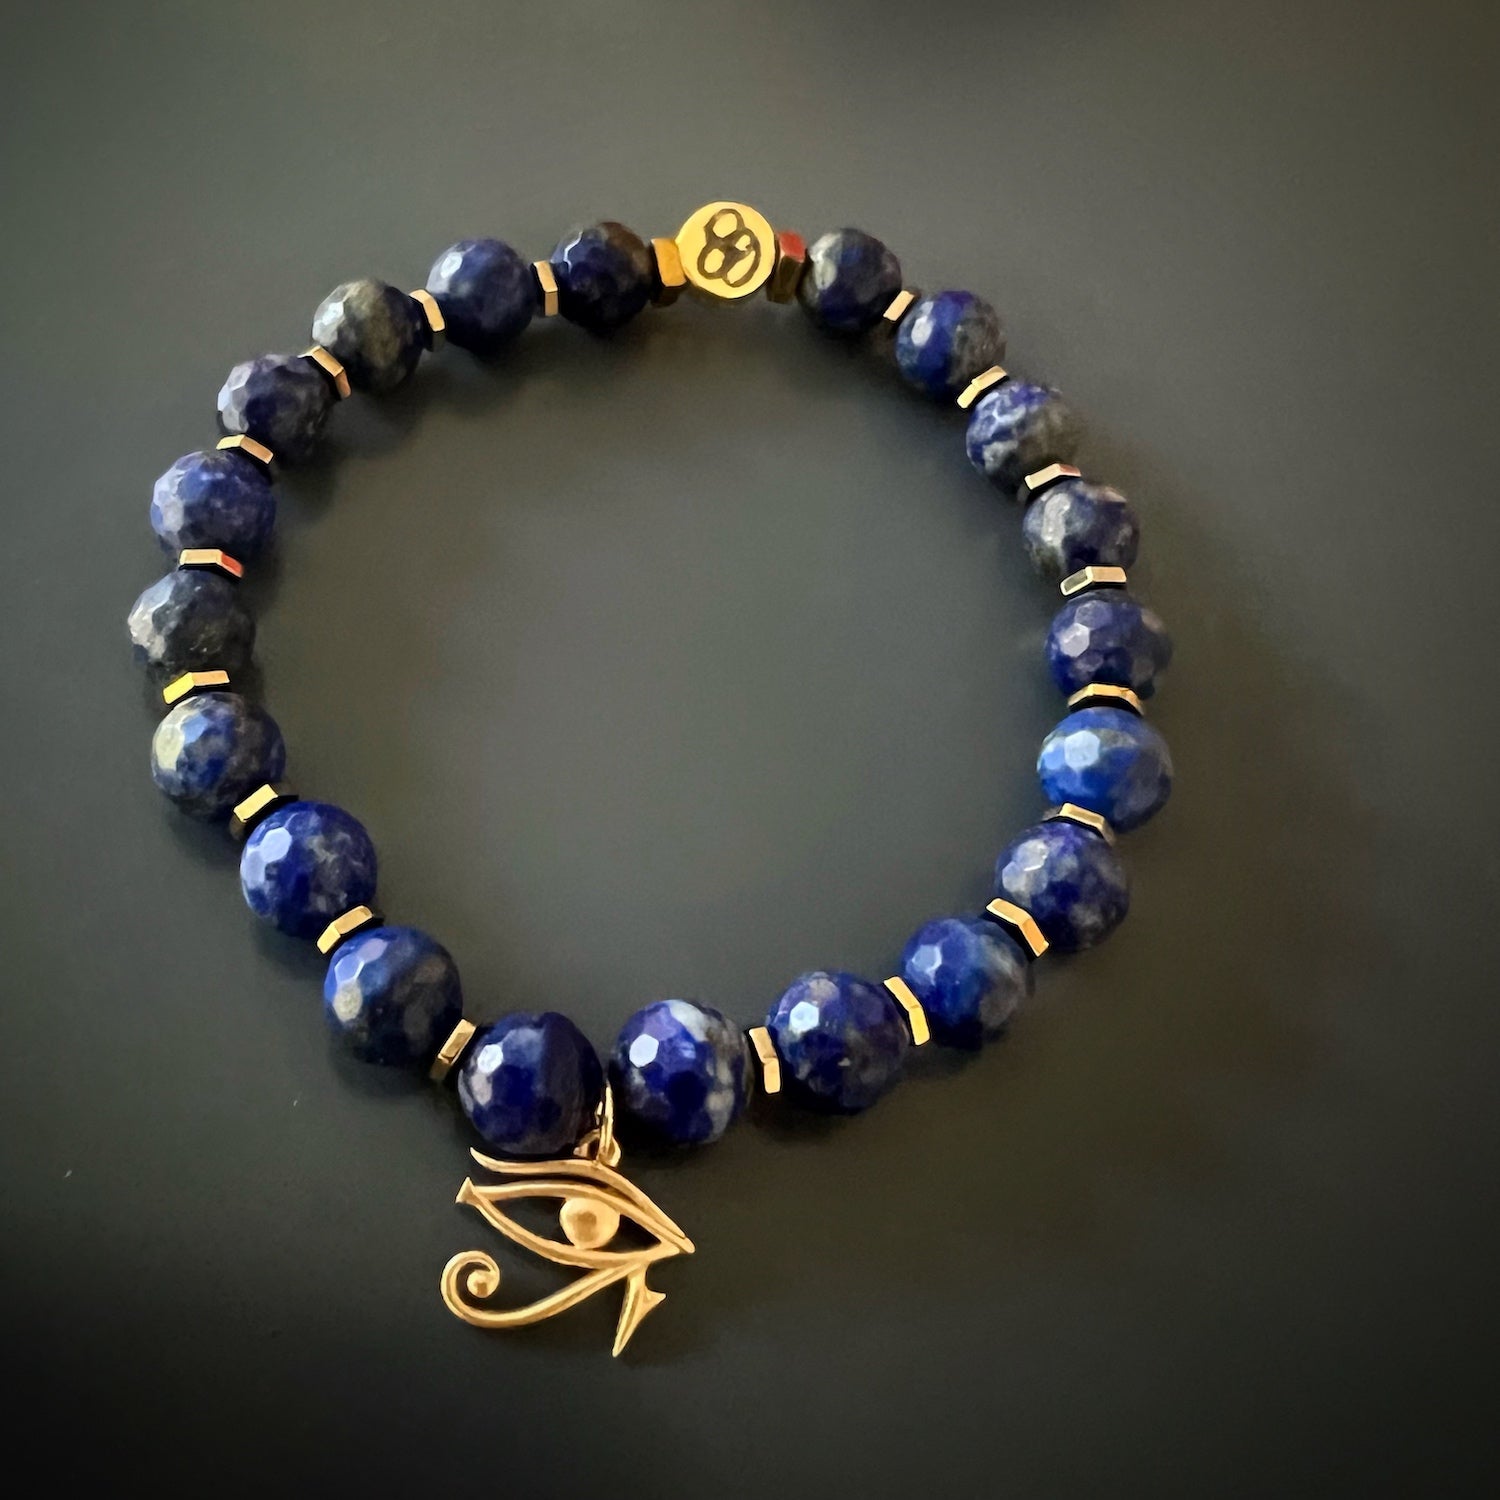 Experience the deep connection to ancient wisdom with the Solid Gold Eye of Ra Spiritual Beaded Bracelet, adorned with lapis lazuli stones and a mesmerizing solid gold charm.